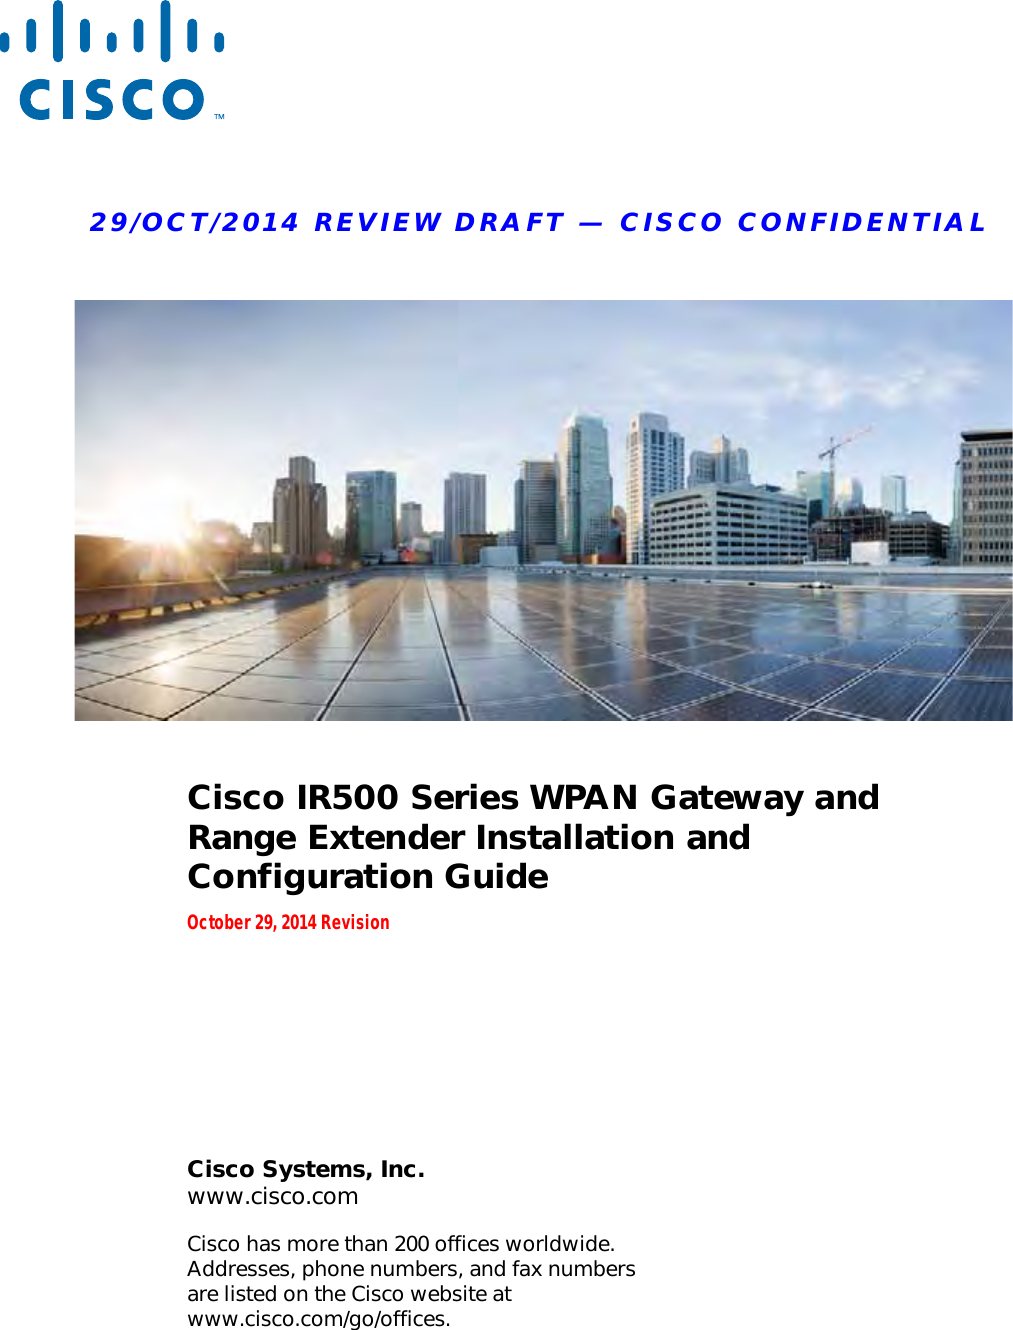 29/OCT/2014 REVIEW DRAFT — CISCO CONFIDENTIALCisco Systems, Inc. www.cisco.comCisco has more than 200 offices worldwide.  Addresses, phone numbers, and fax numbers  are listed on the Cisco website at  www.cisco.com/go/offices.Cisco IR500 Series WPAN Gateway and Range Extender Installation and Configuration GuideOctober 29, 2014 Revision